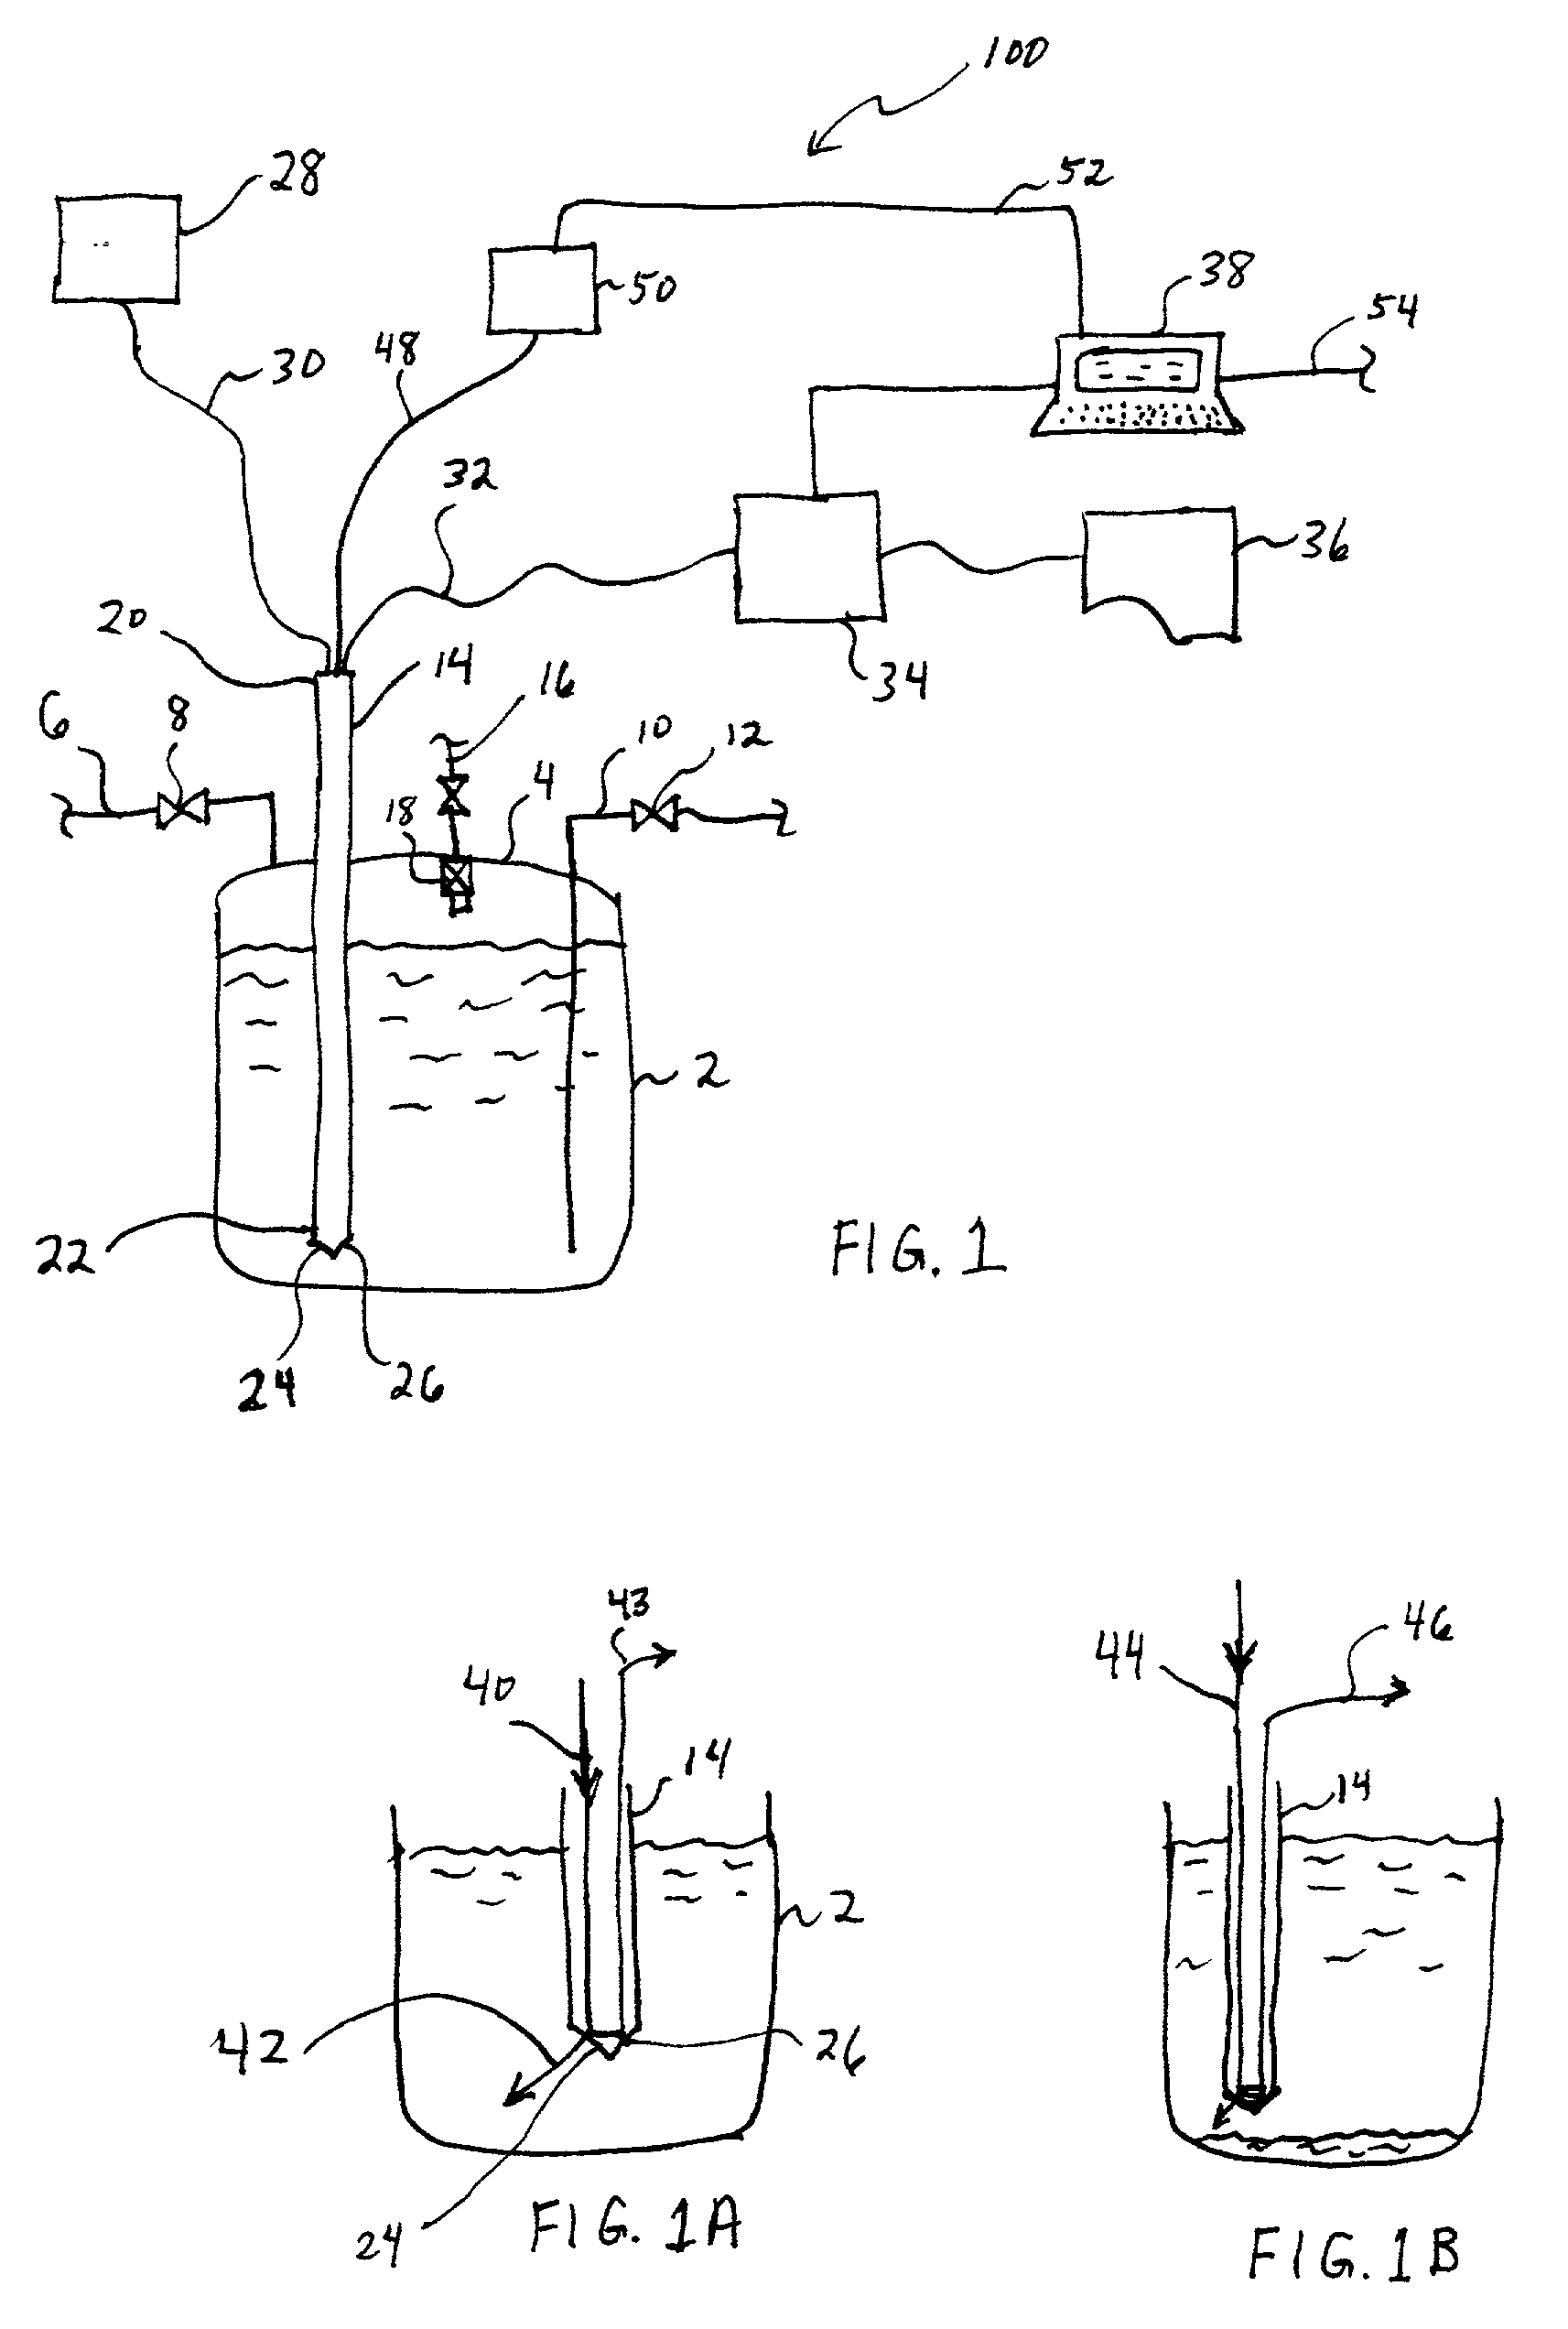 Optical monitoring processes and apparatus for combined liquid level sensing and quality control